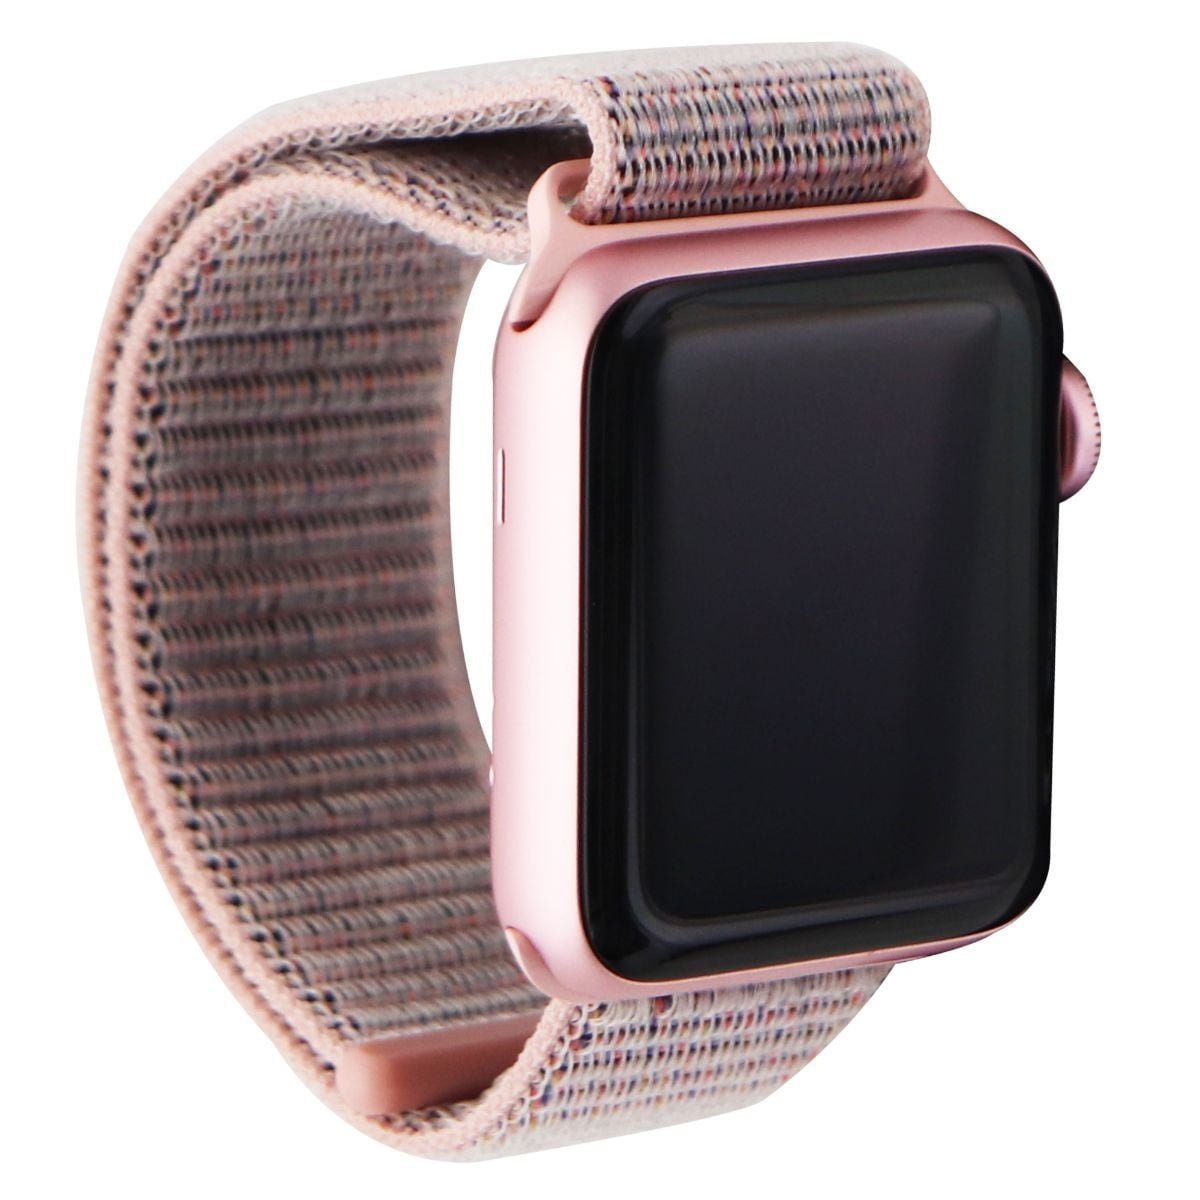 apple watch a1757 price